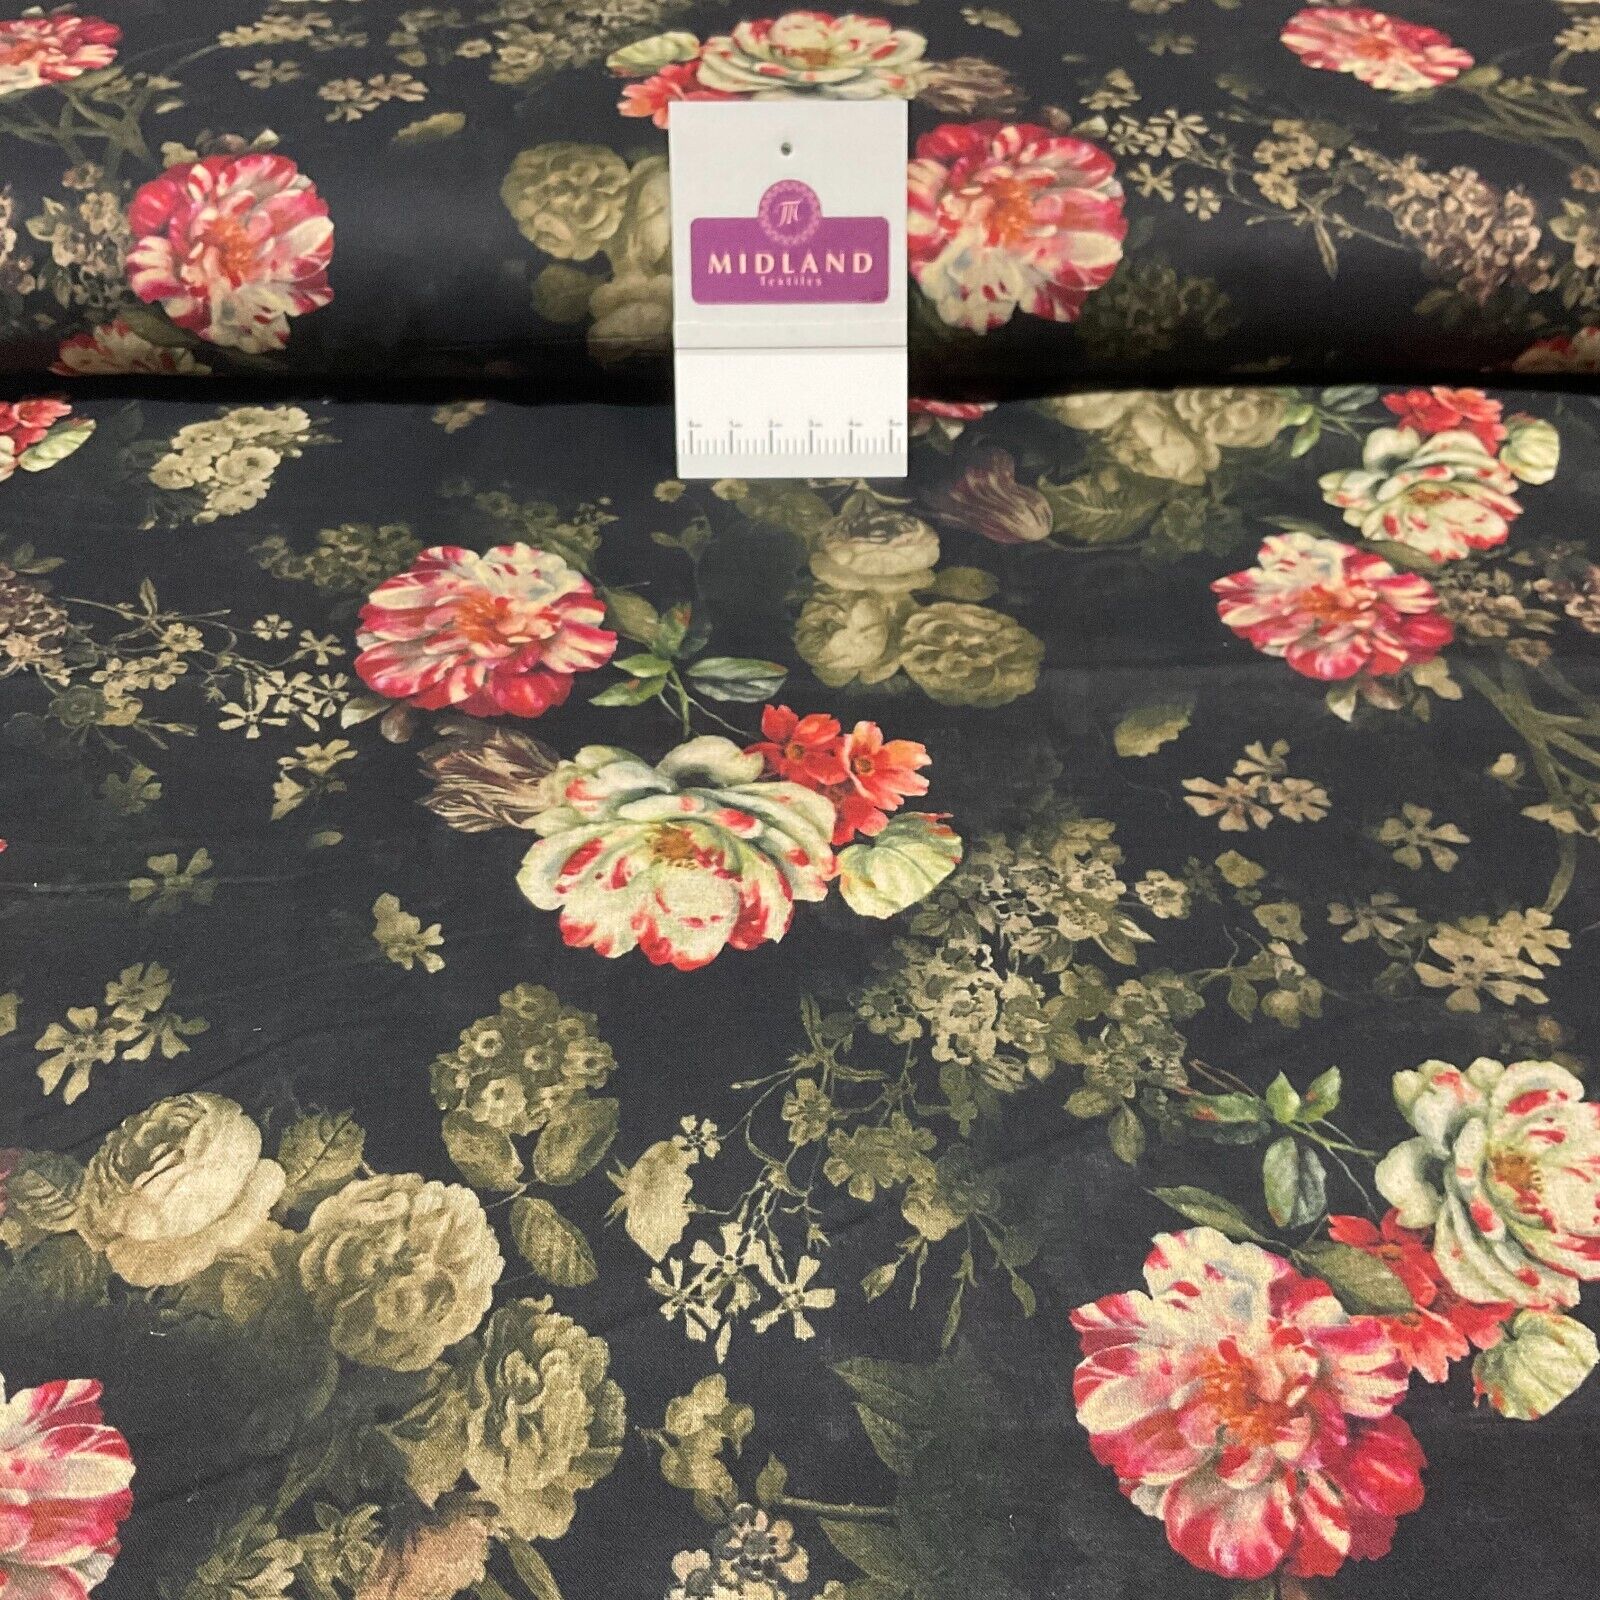 Cotton Lawn Summer Vintage Floral Printed Dress fabric 100% M1670